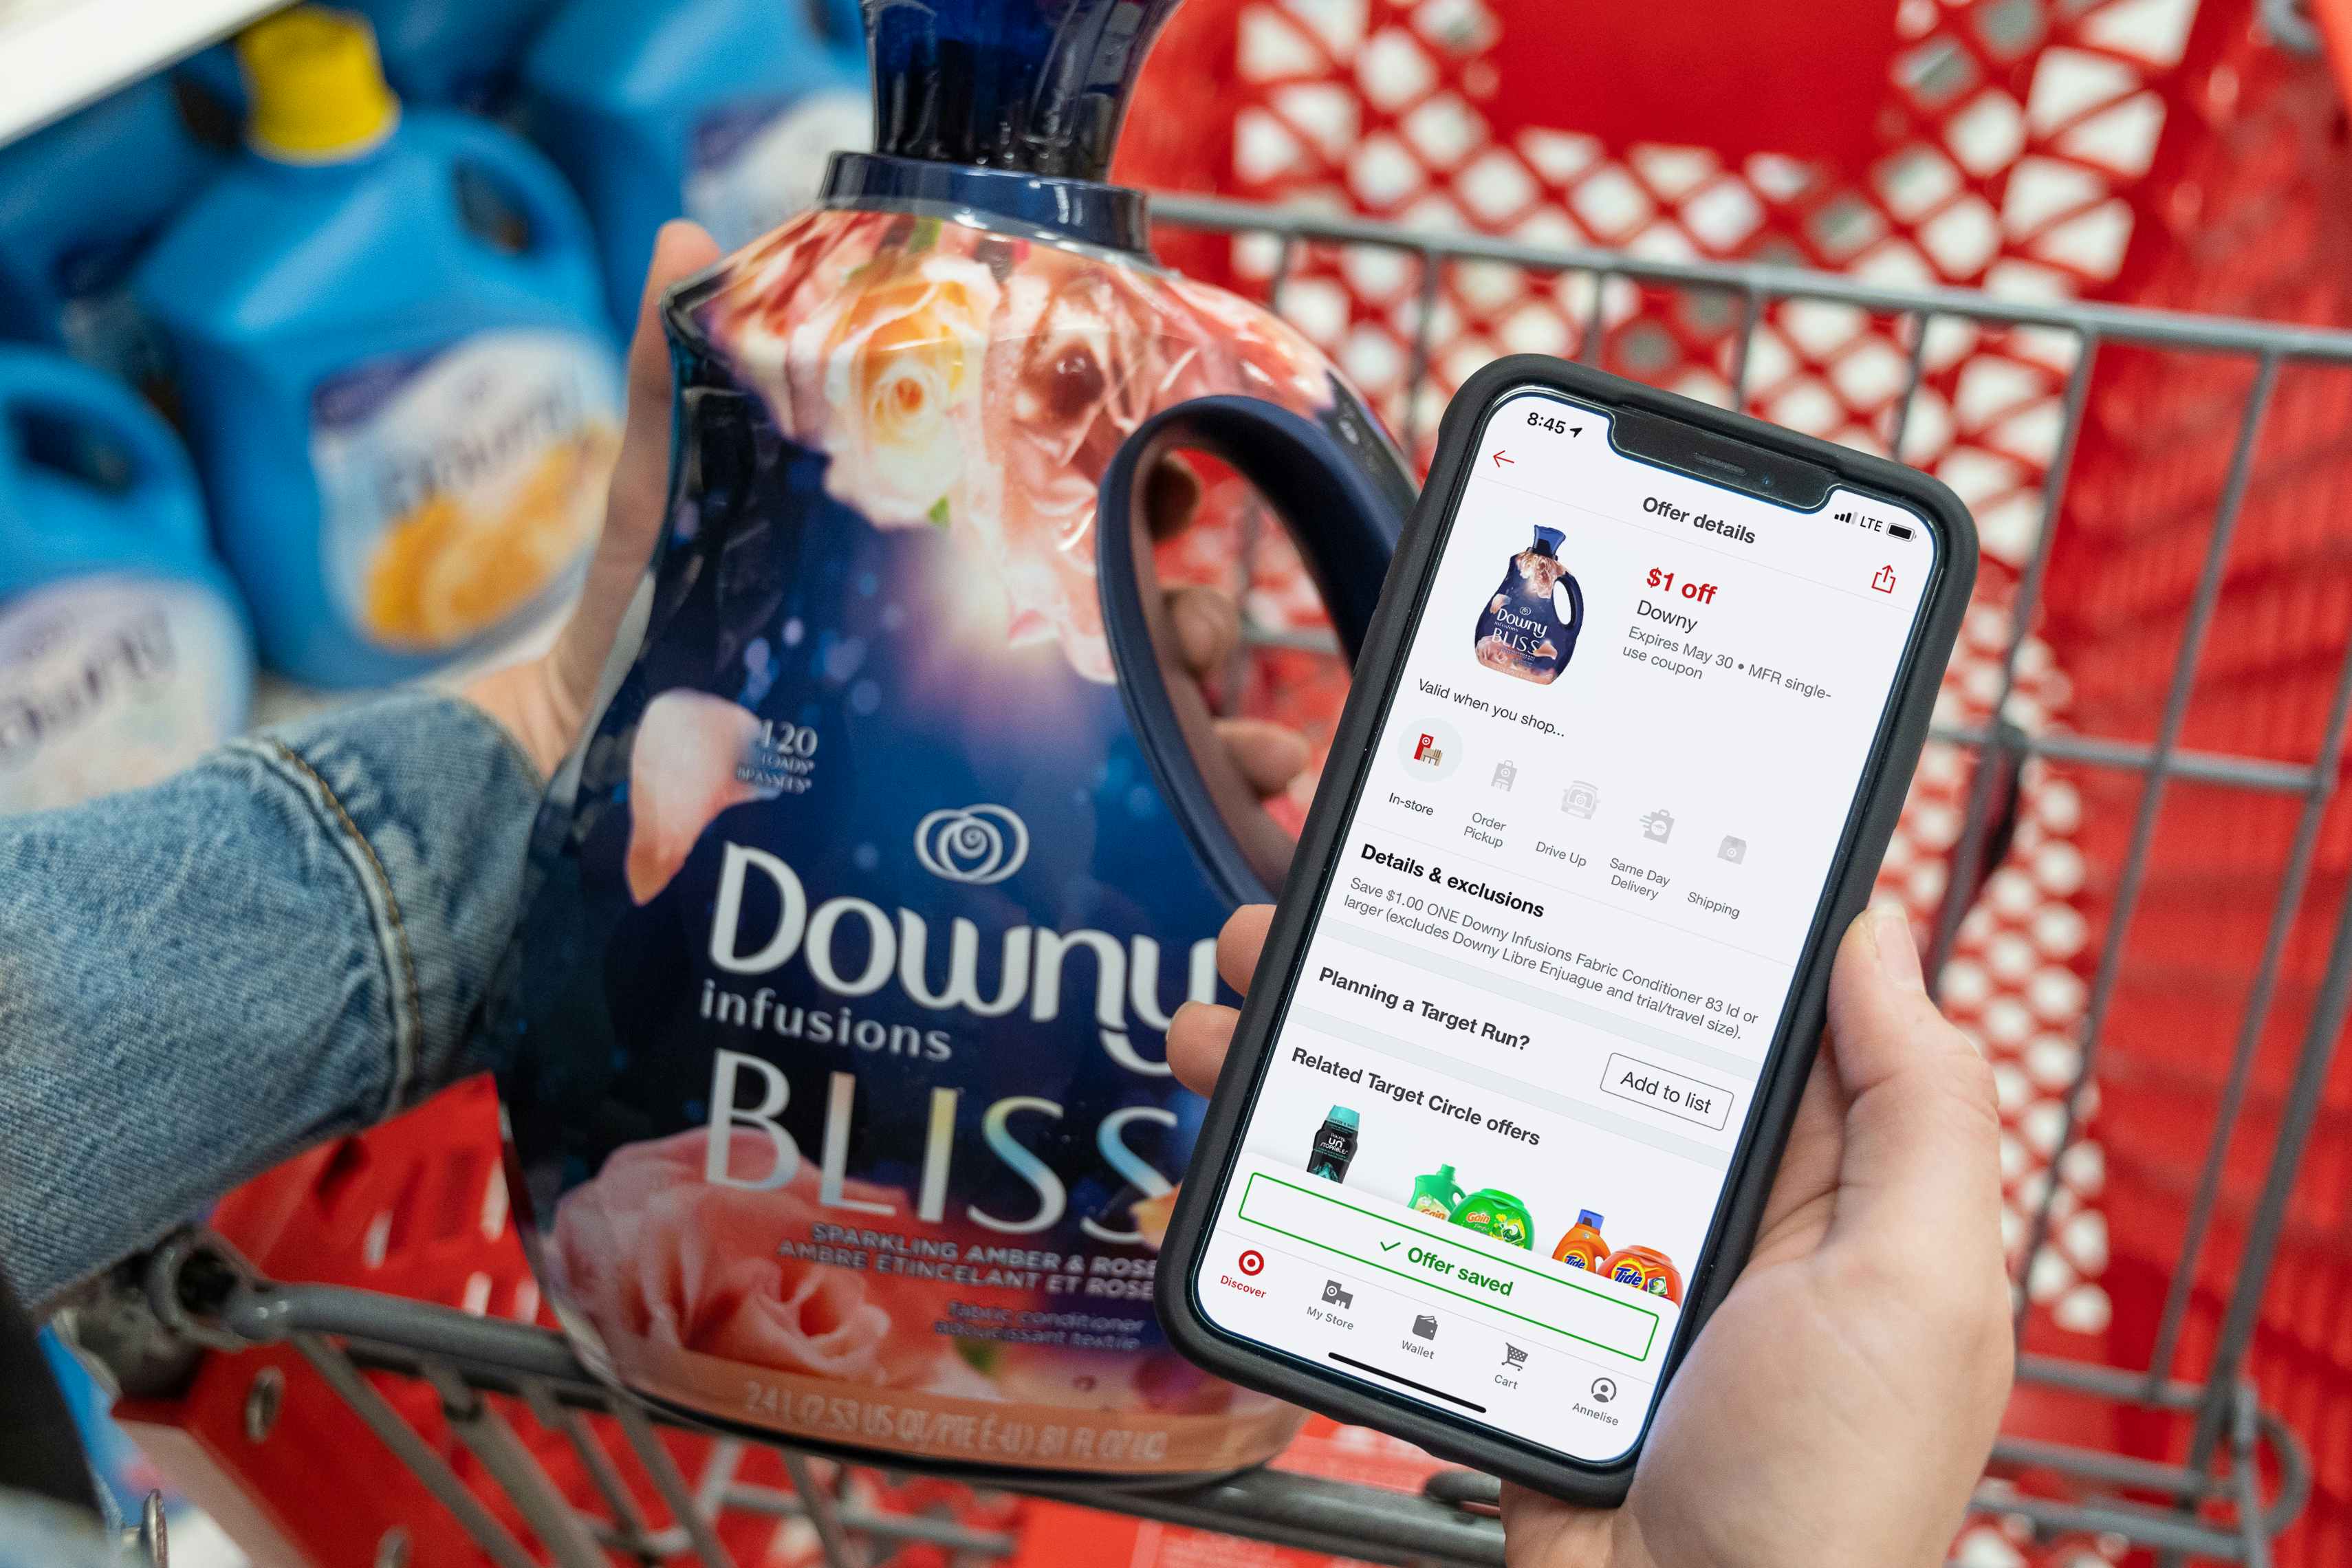 A bottle of Downy bliss fabric softener next to a manufactures coupon on the displayed on a the Target circle app..